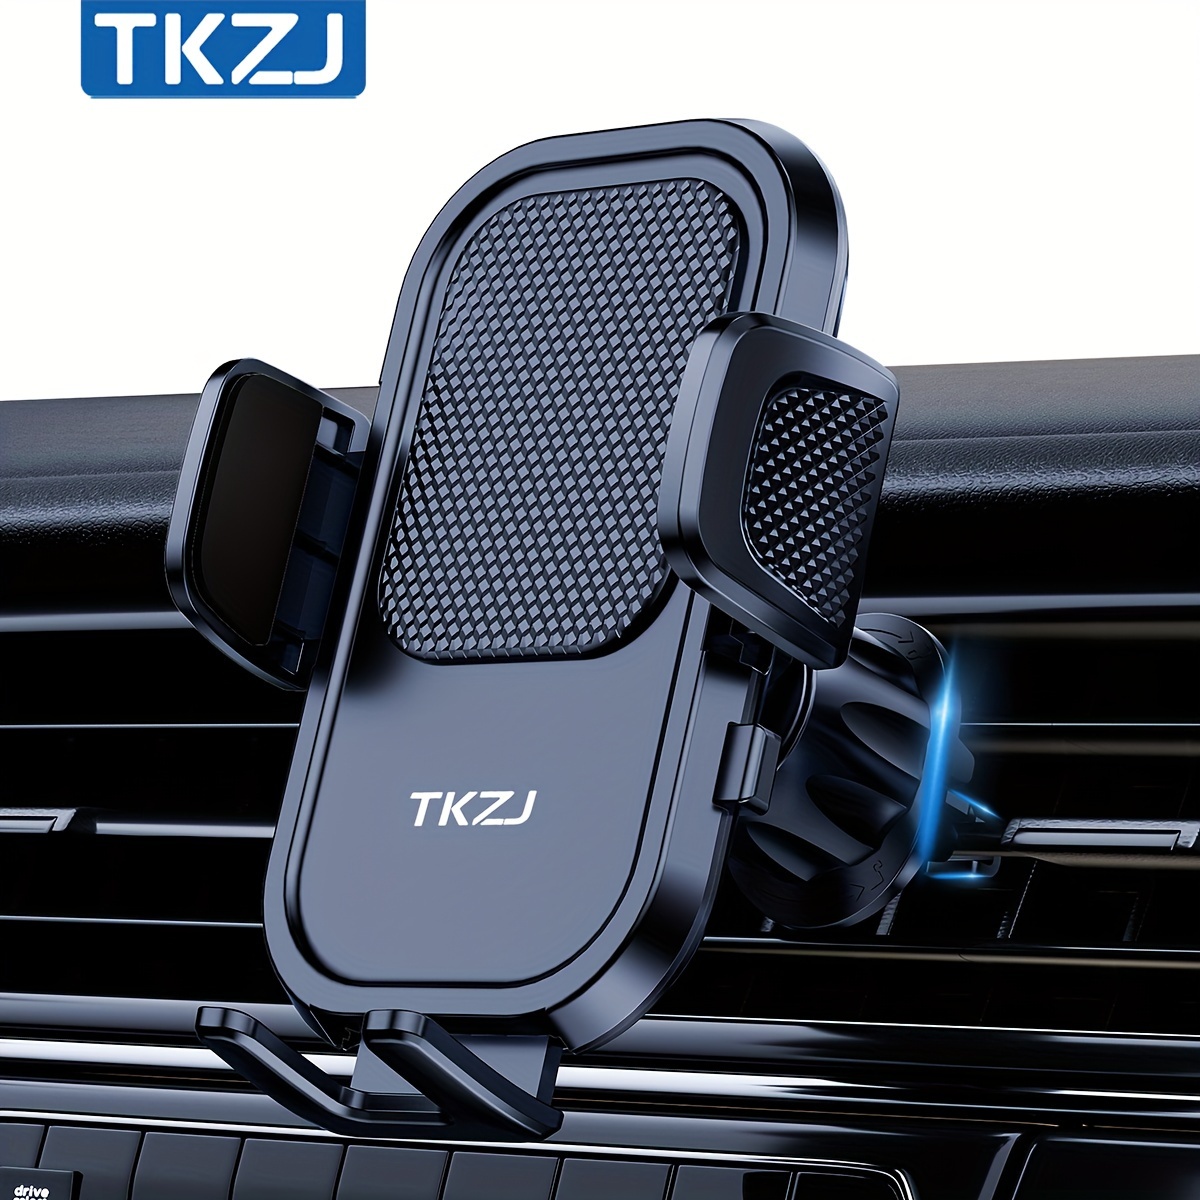 

Tkzj T004l Magnetic Car Phone Holder, Upgraded Super Strong Magnetic Cell Phone Mount For Car Air Vent, Compatible With All Smartphones, Fit For 14 13 12 Pro Max All Phones